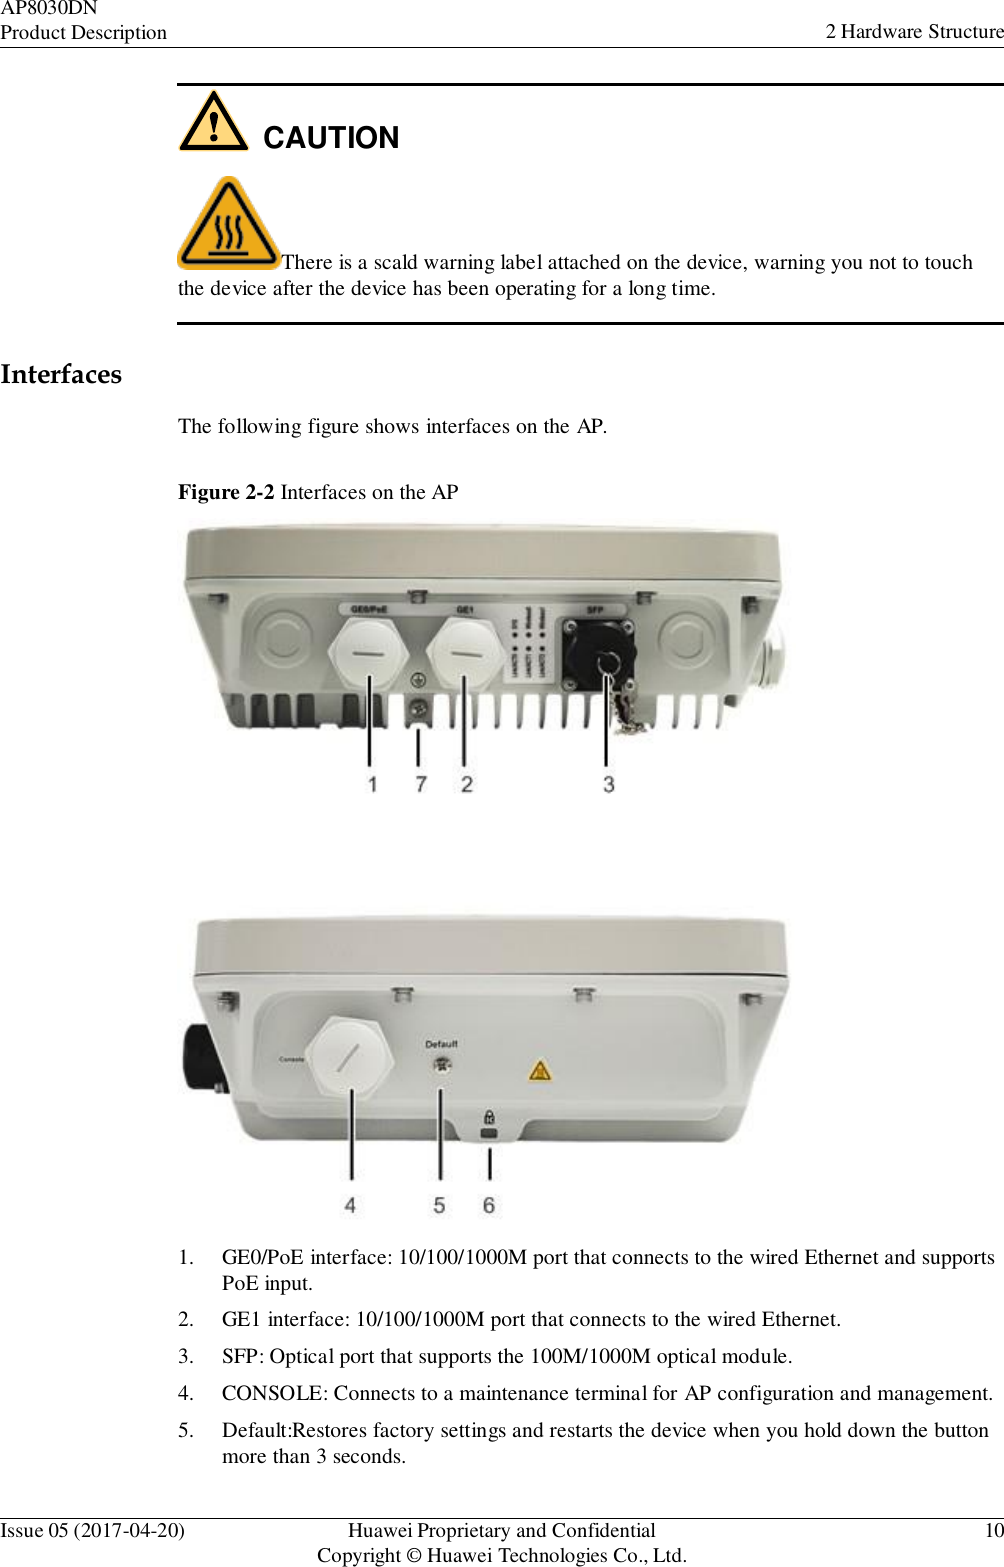 Issue 05 (2017-04-20) Huawei Proprietary and Confidential Copyright © Huawei Technologies Co., Ltd. 10 AP8030DN Product Description 2 Hardware Structure      CAUTION There is a scald warning label attached on the device, warning you not to touch the device after the device has been operating for a long time.    Interfaces  The following figure shows interfaces on the AP.   Figure 2-2 Interfaces on the AP   1. GE0/PoE interface: 10/100/1000M port that connects to the wired Ethernet and supports PoE input. 2. GE1 interface: 10/100/1000M port that connects to the wired Ethernet. 3. SFP: Optical port that supports the 100M/1000M optical module. 4. CONSOLE: Connects to a maintenance terminal for AP configuration and management. 5. Default:Restores factory settings and restarts the device when you hold down the button more than 3 seconds. 